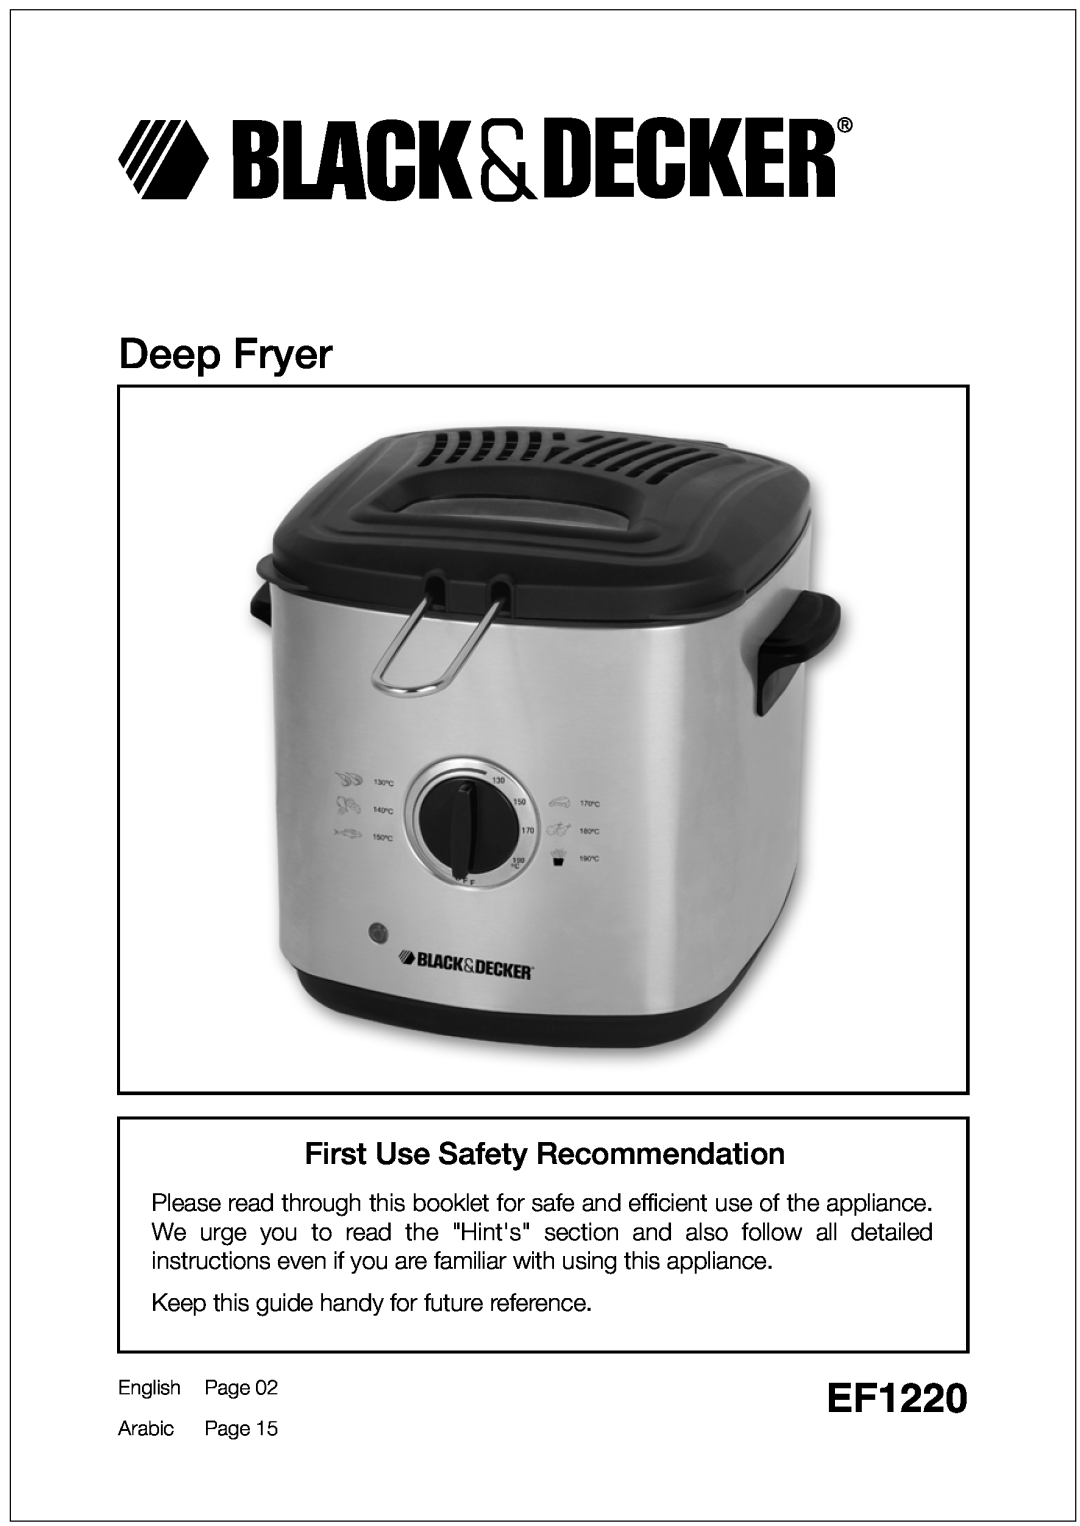 Black & Decker EF1220 manual First Use Safety Recommendation, Deep Fryer, Keep this guide handy for future reference 